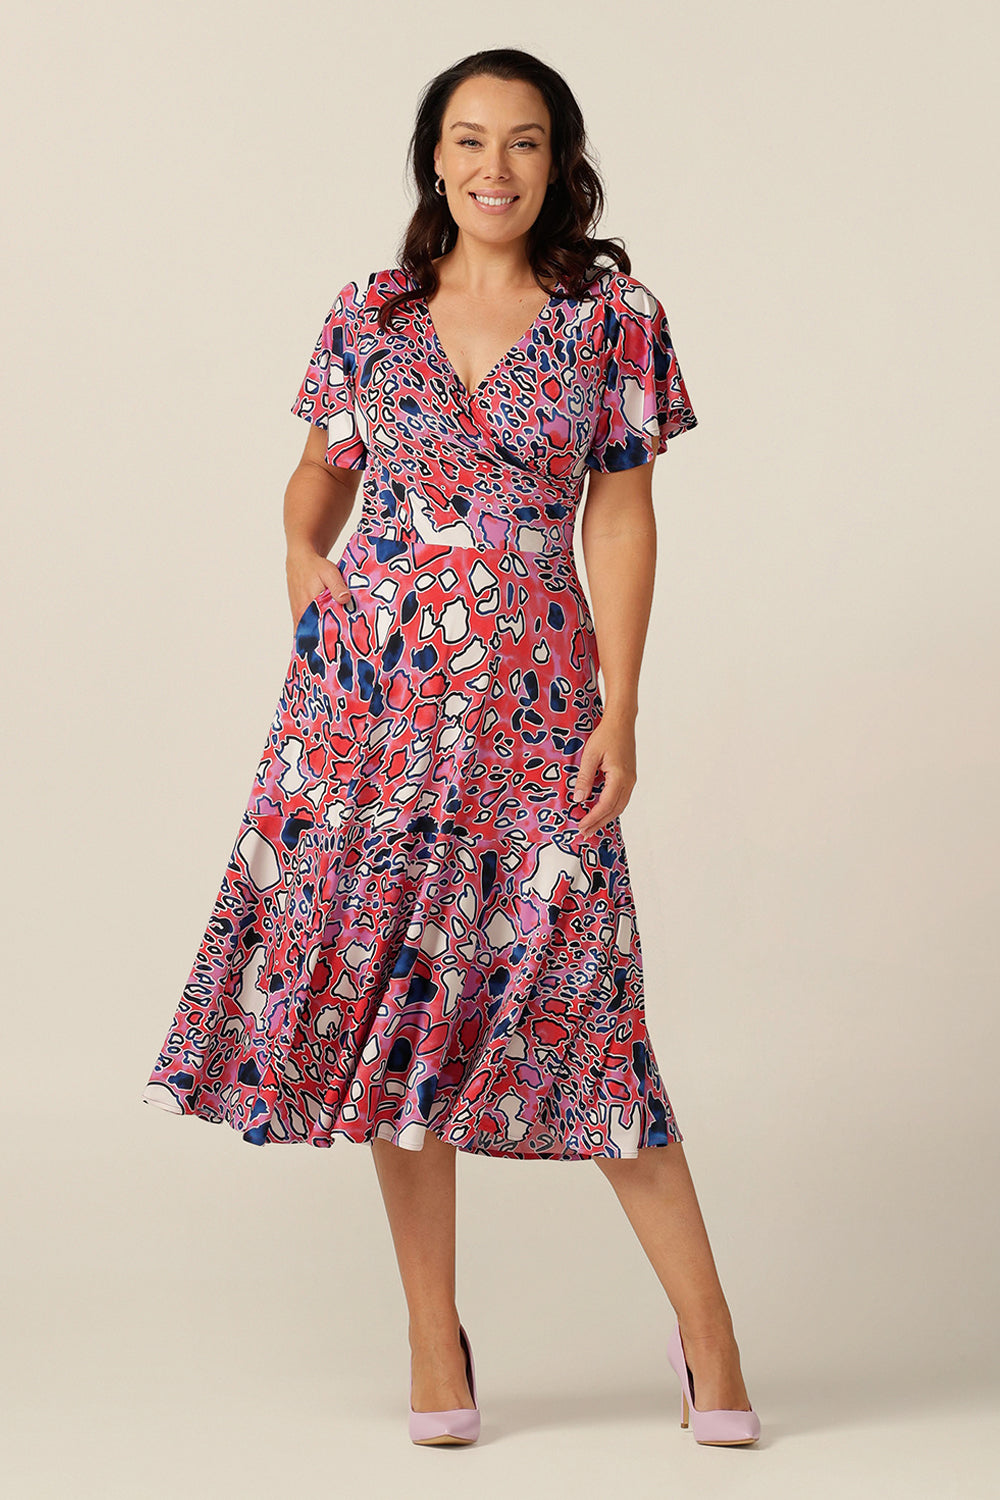 fixed wrap jersey dress with flutter sleeves, pockets and ruffle on skirt.